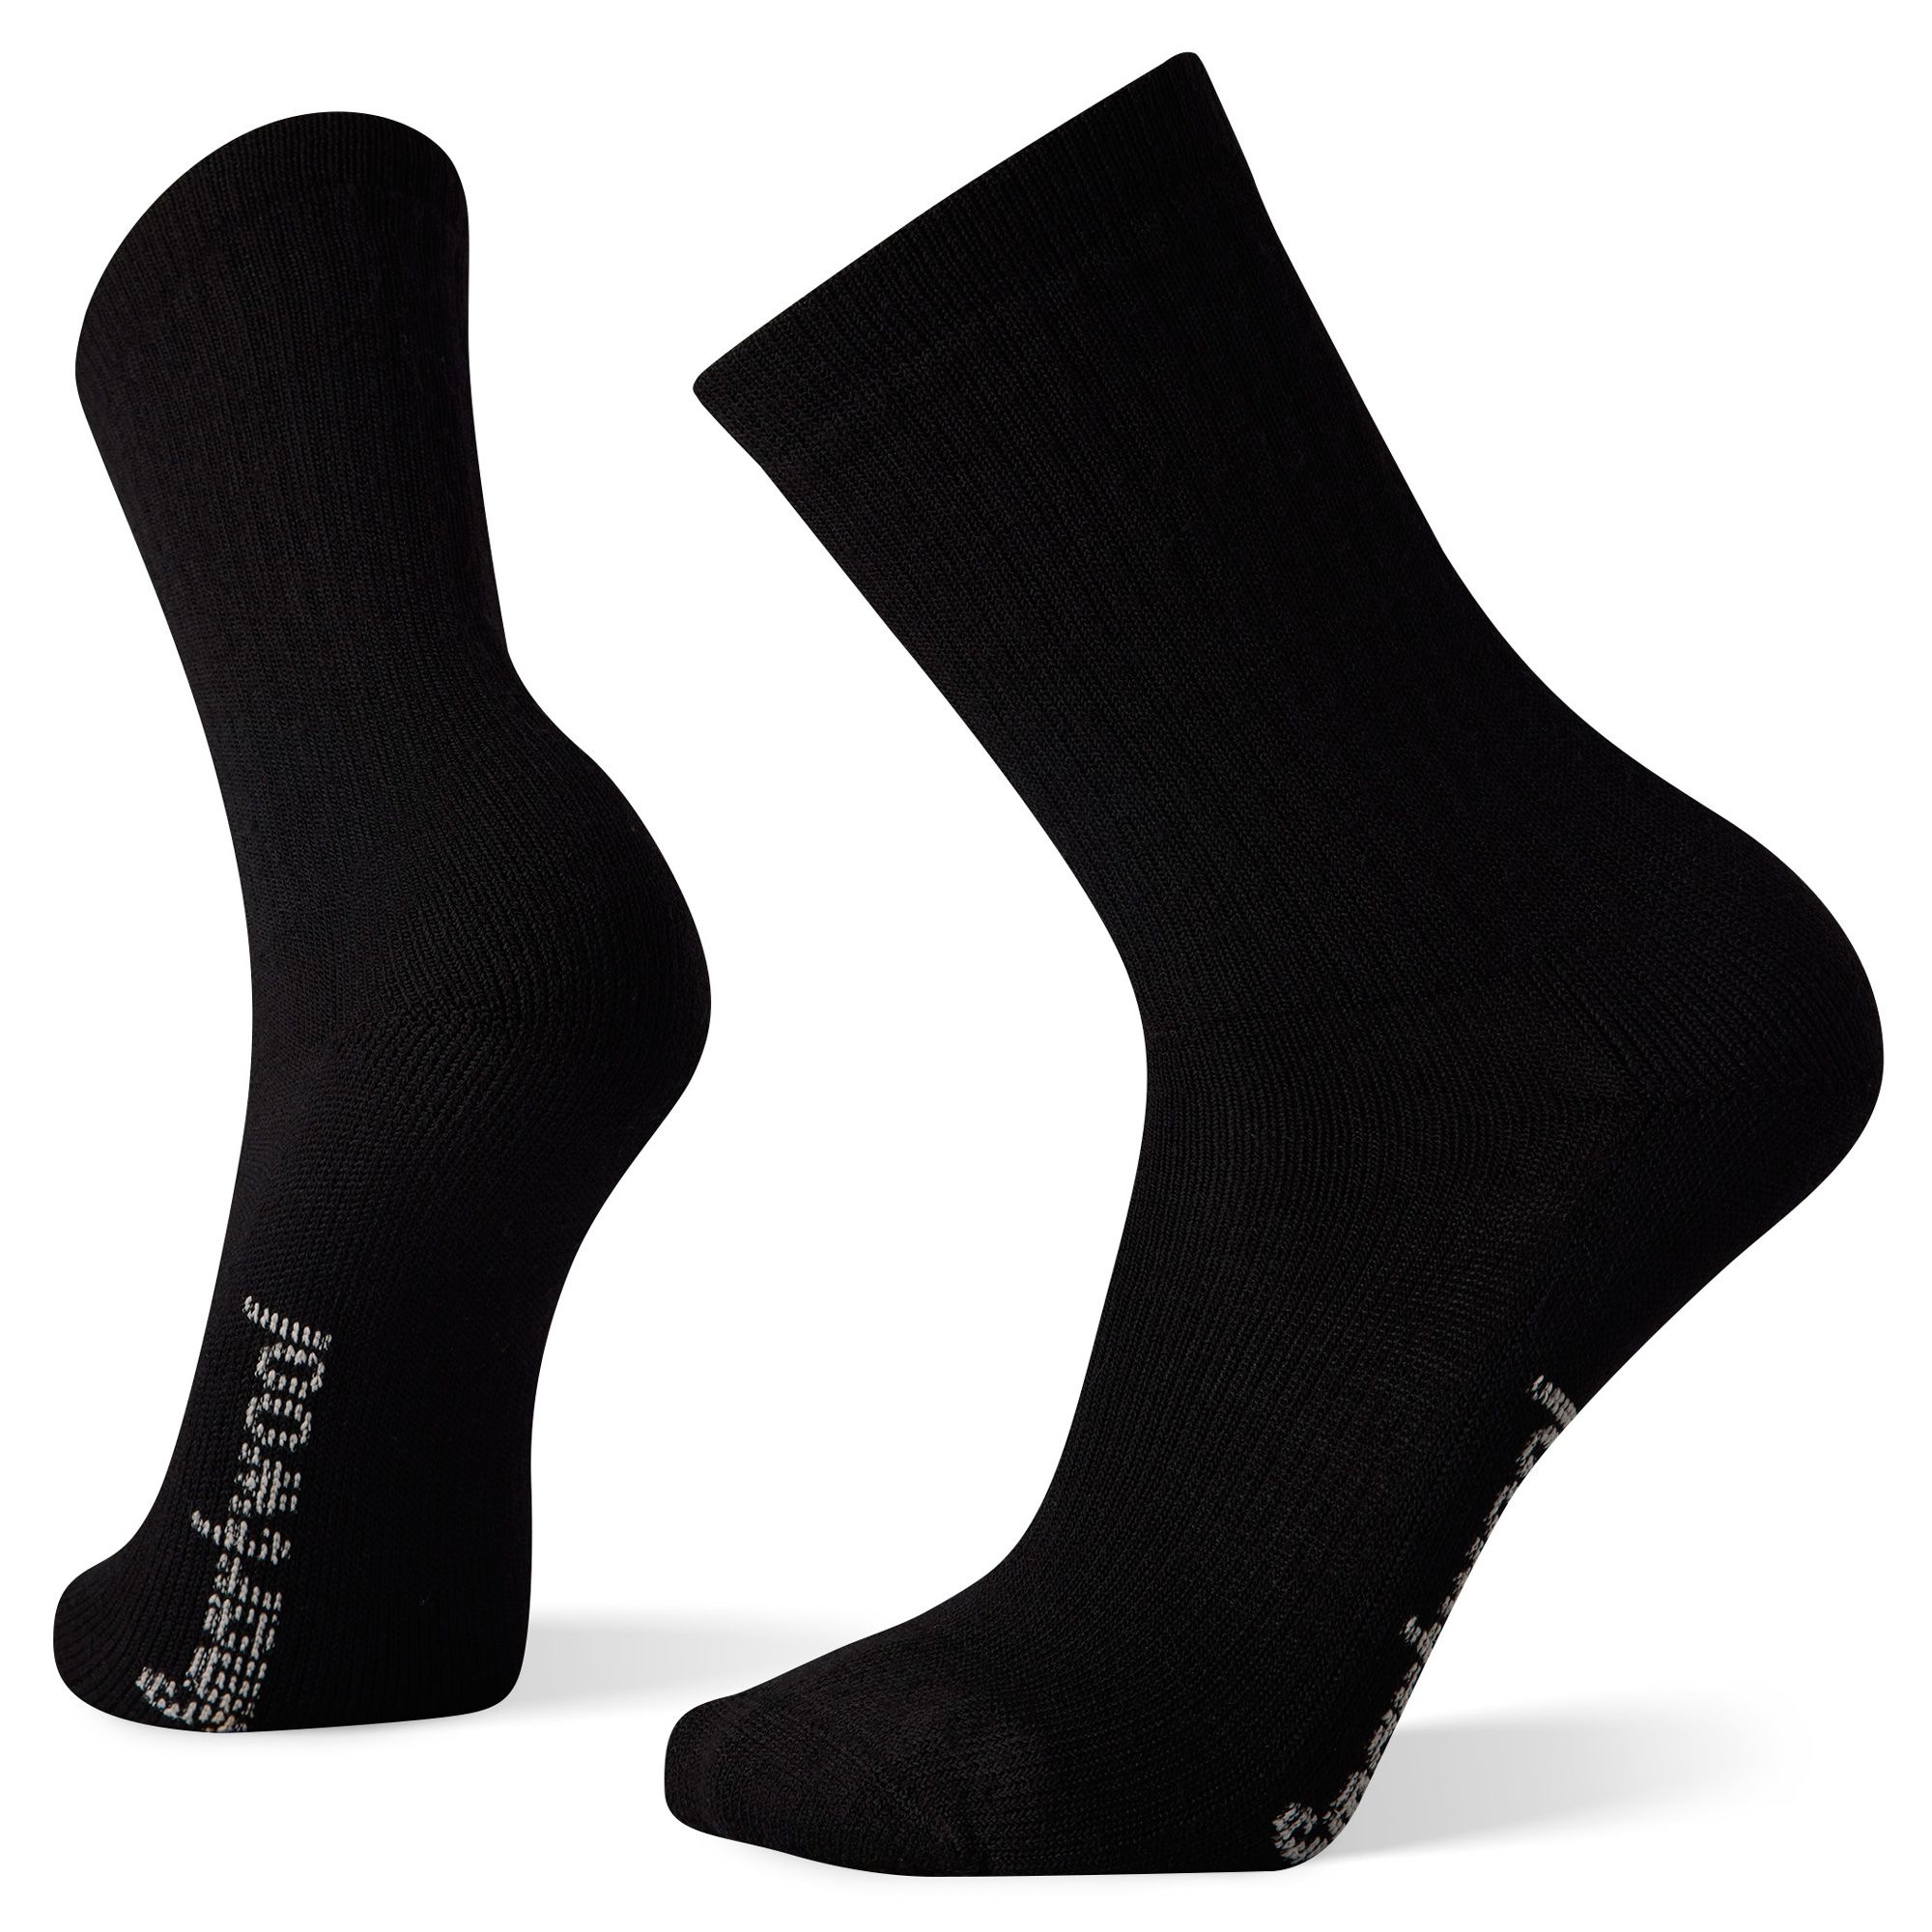 https://smartwool.ca/media/catalog/product/cache/7b241bfd6c26fd1ffc0d56d7717f5c2b/s/w/sw001646001-1-p_1.jpg